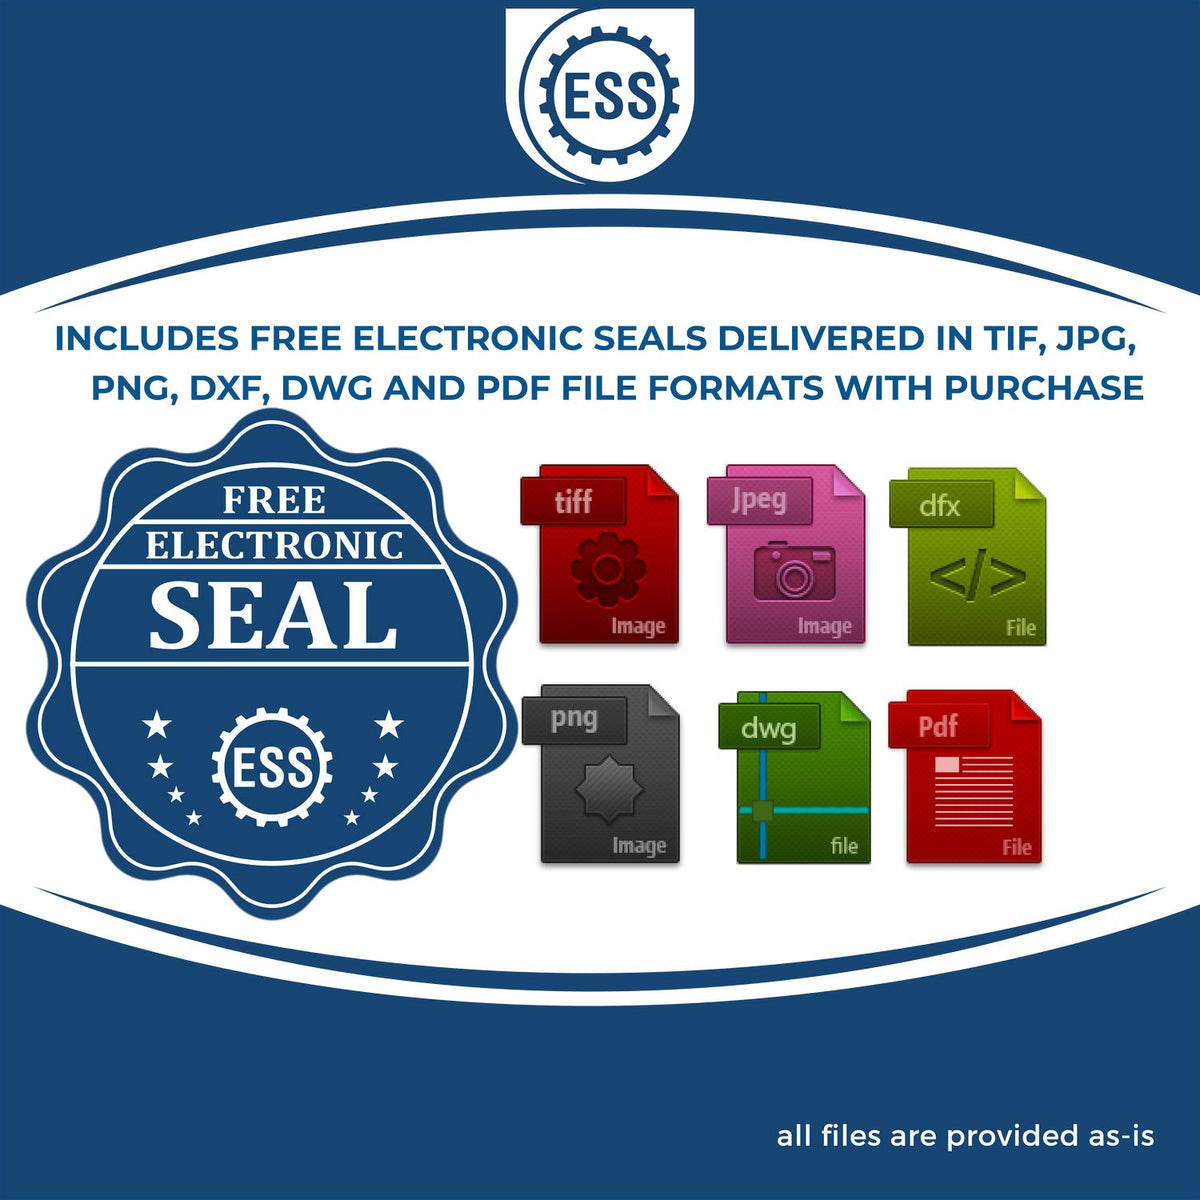 An infographic for the free electronic seal for the Heavy-Duty Oklahoma Rectangular Notary Stamp illustrating the different file type icons such as DXF, DWG, TIF, JPG and PNG.